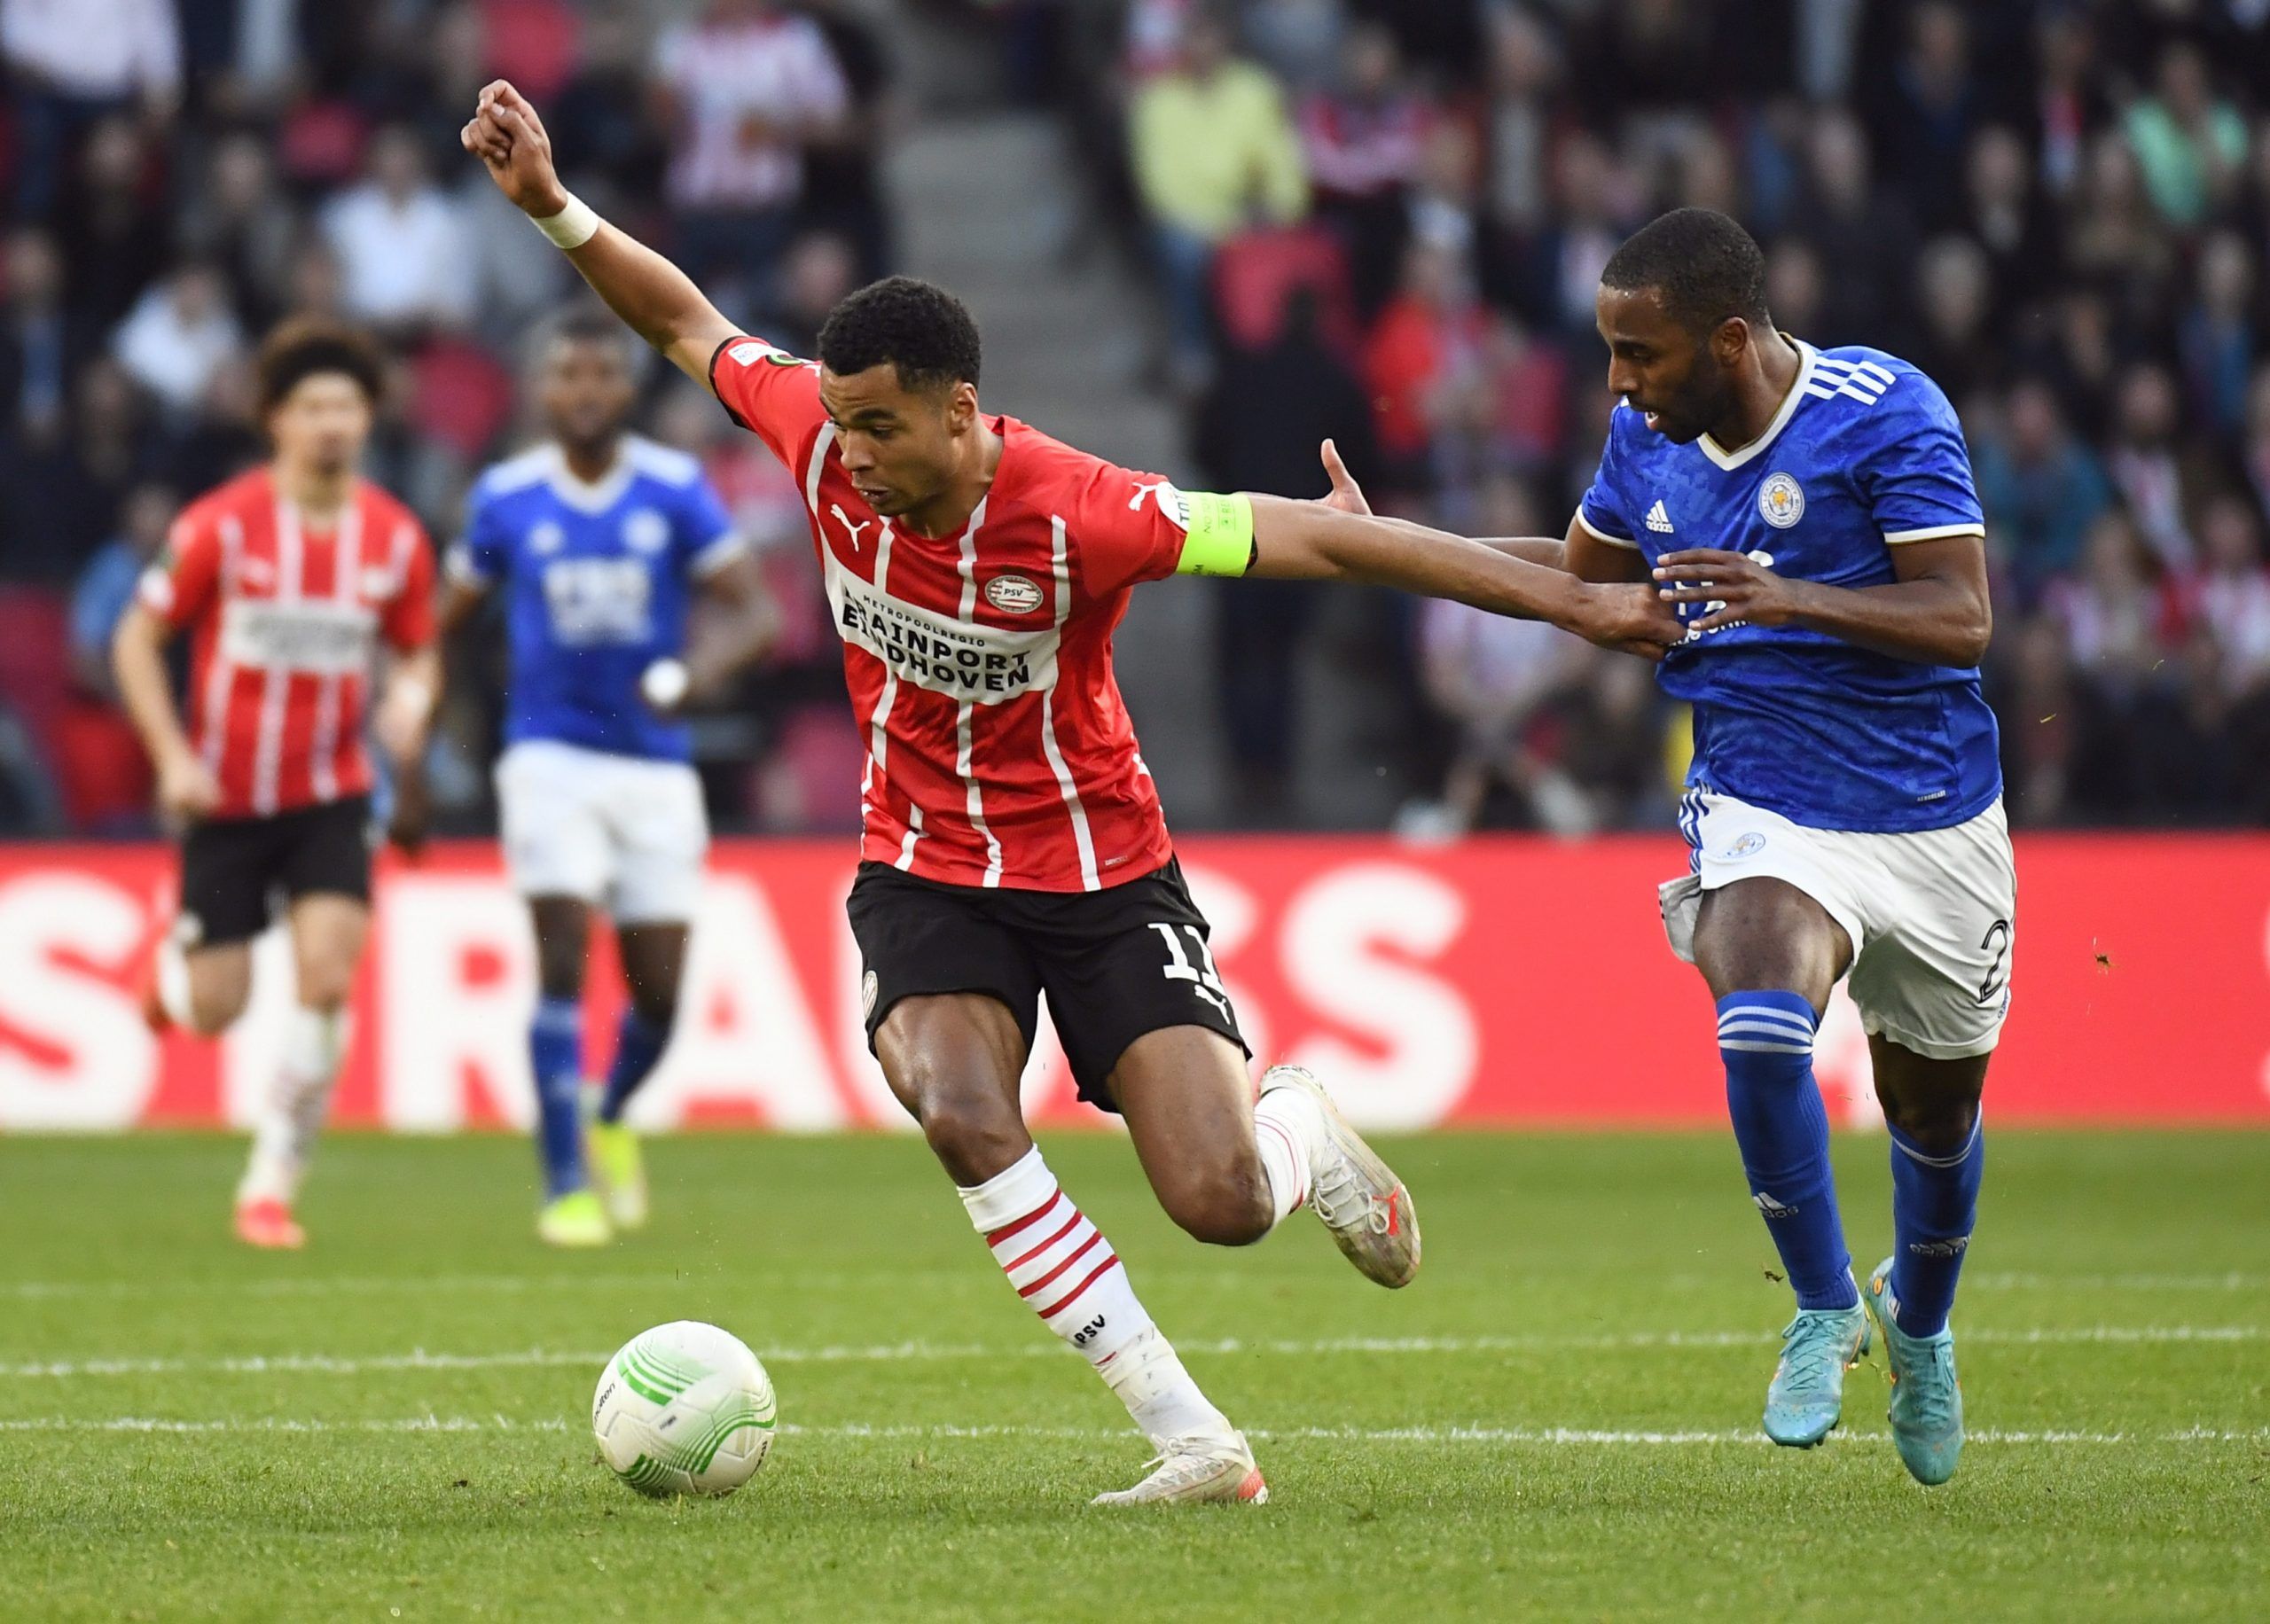 cody gakpo-psv-europa-league-conference-leicester-city-manchester-united-transfer-news-erik-ten-hag-latestSoccer Football - Europa Conference League - Quarter Final - Second Leg - PSV Eindhoven v Leicester City - Philips Stadion, Eindhoven, Netherlands - April 14, 2022 PSV Eindhoven's Cody Gakpo in action with Leicester City's Ricardo Pereira REUTERS/Piroschka Van De Wouw